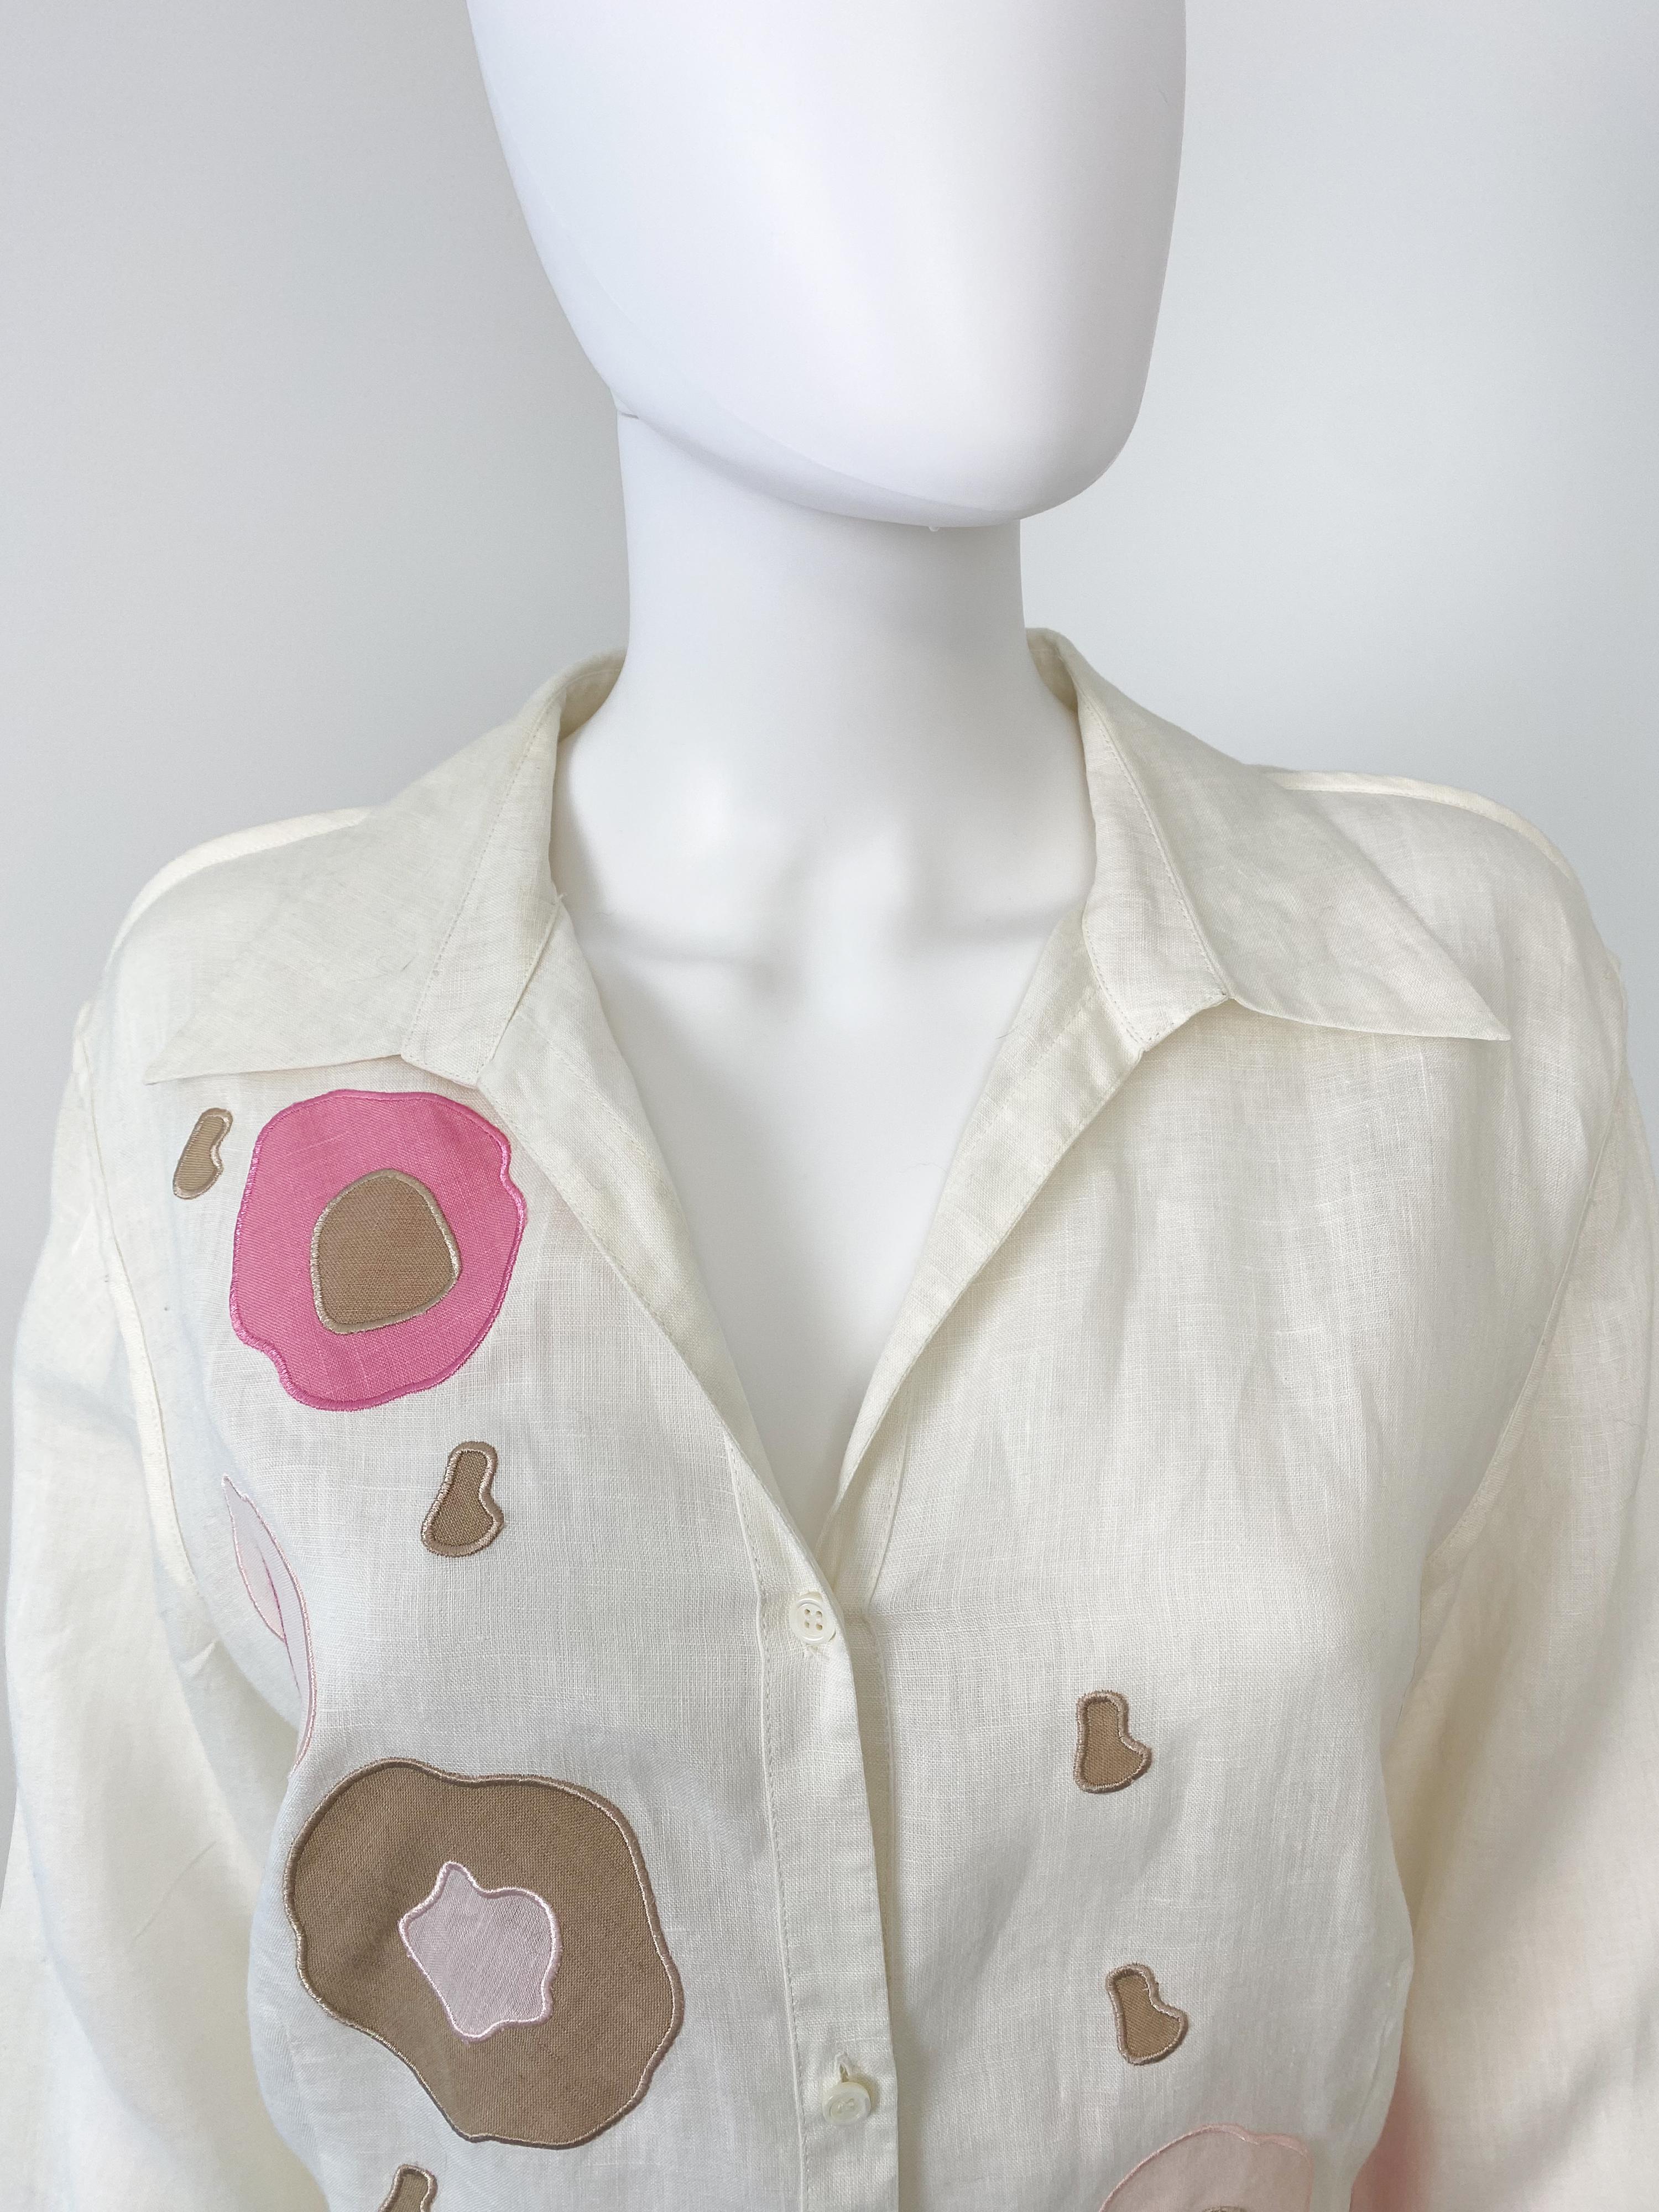 Vintage 1990s Louis Feraud Linen and Cotton Blouse Top with Embroidery Size L For Sale 2